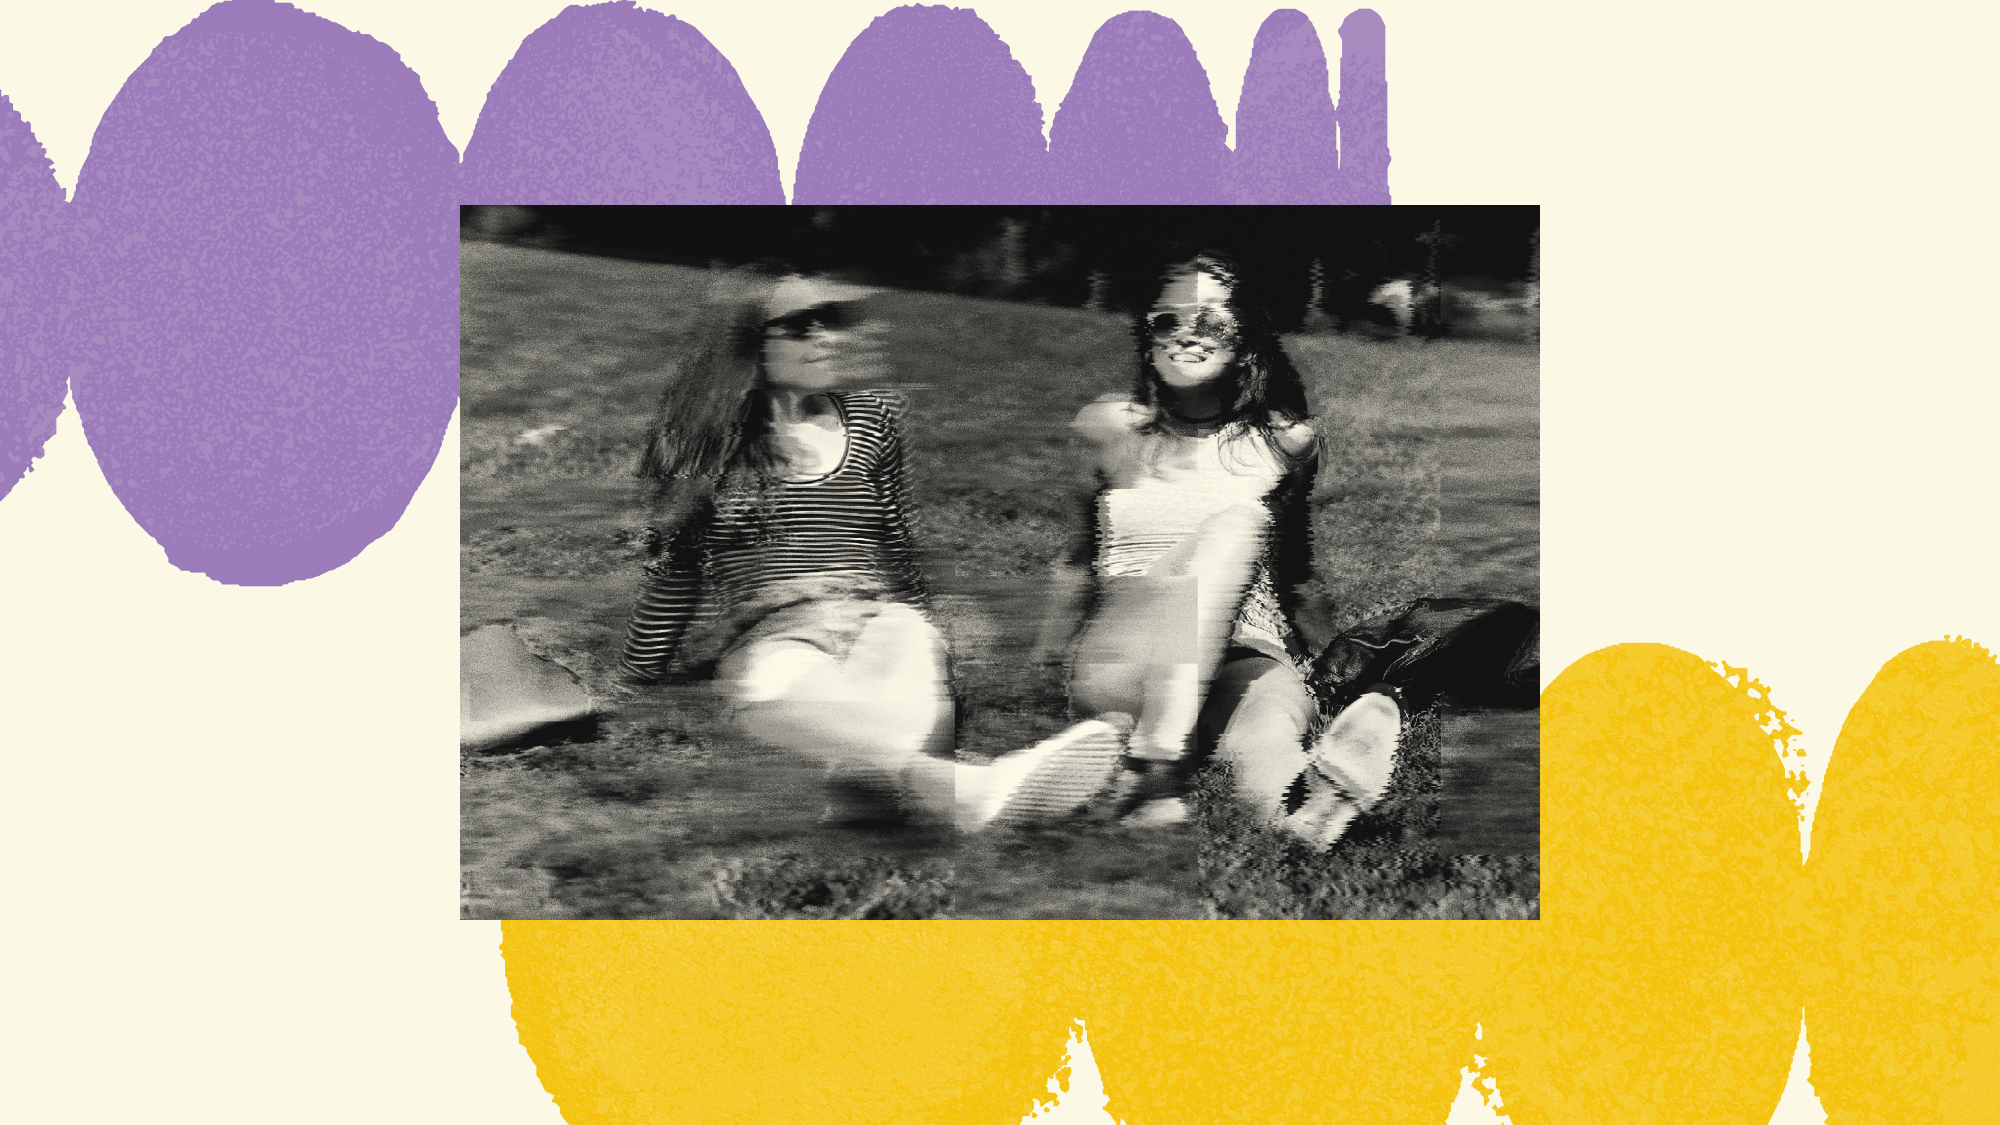 A distorted image shows two women sitting on the grass and laughing